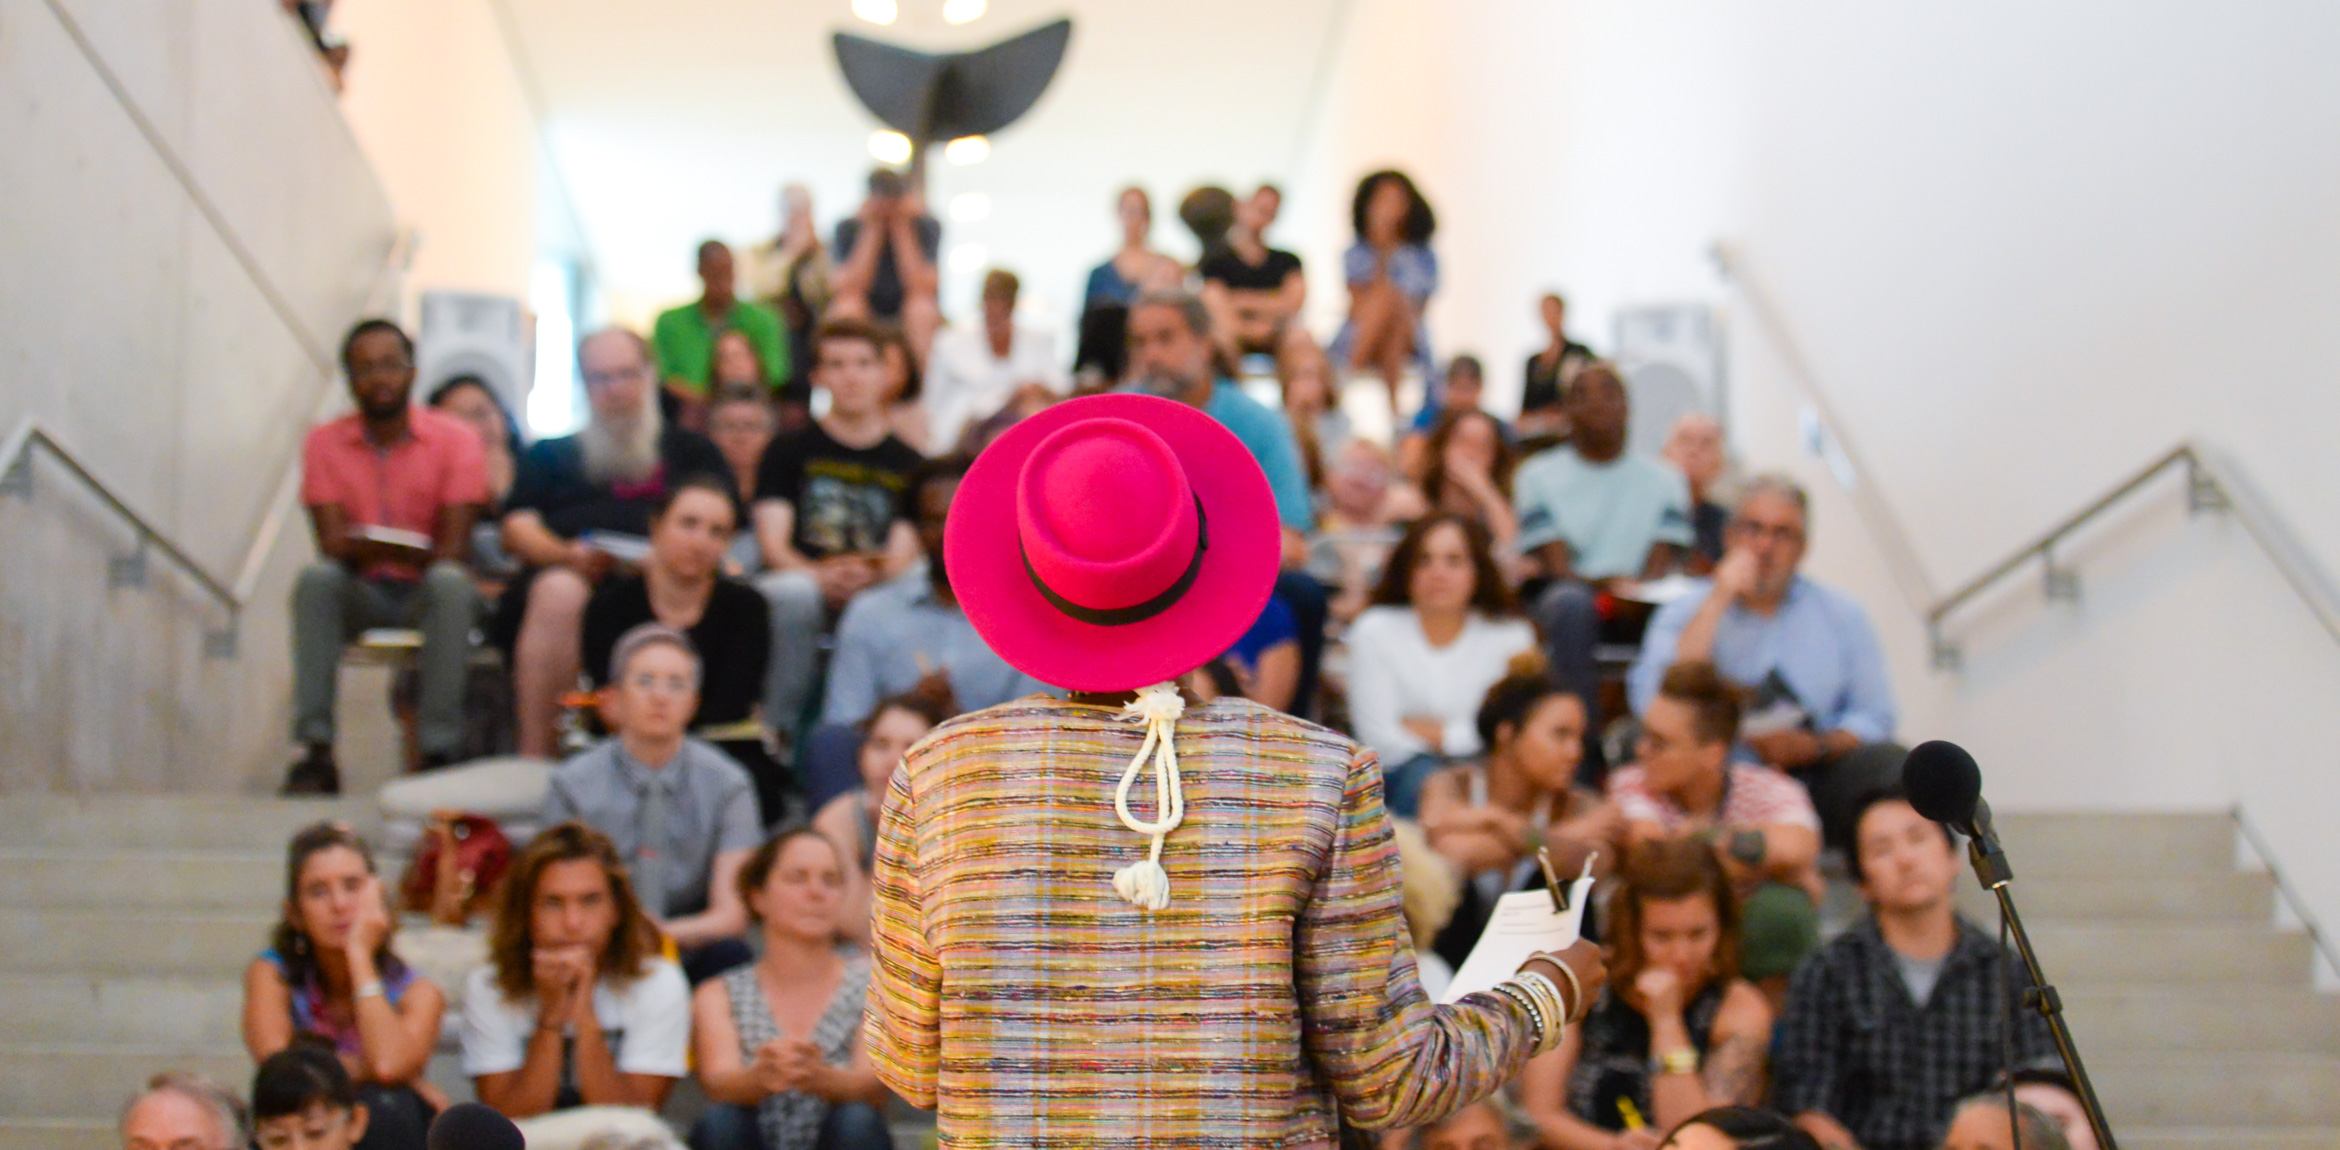 A view from behind of Tara Tee, wearing a bright pink hat, speaking to an audience on the Main Staircase.